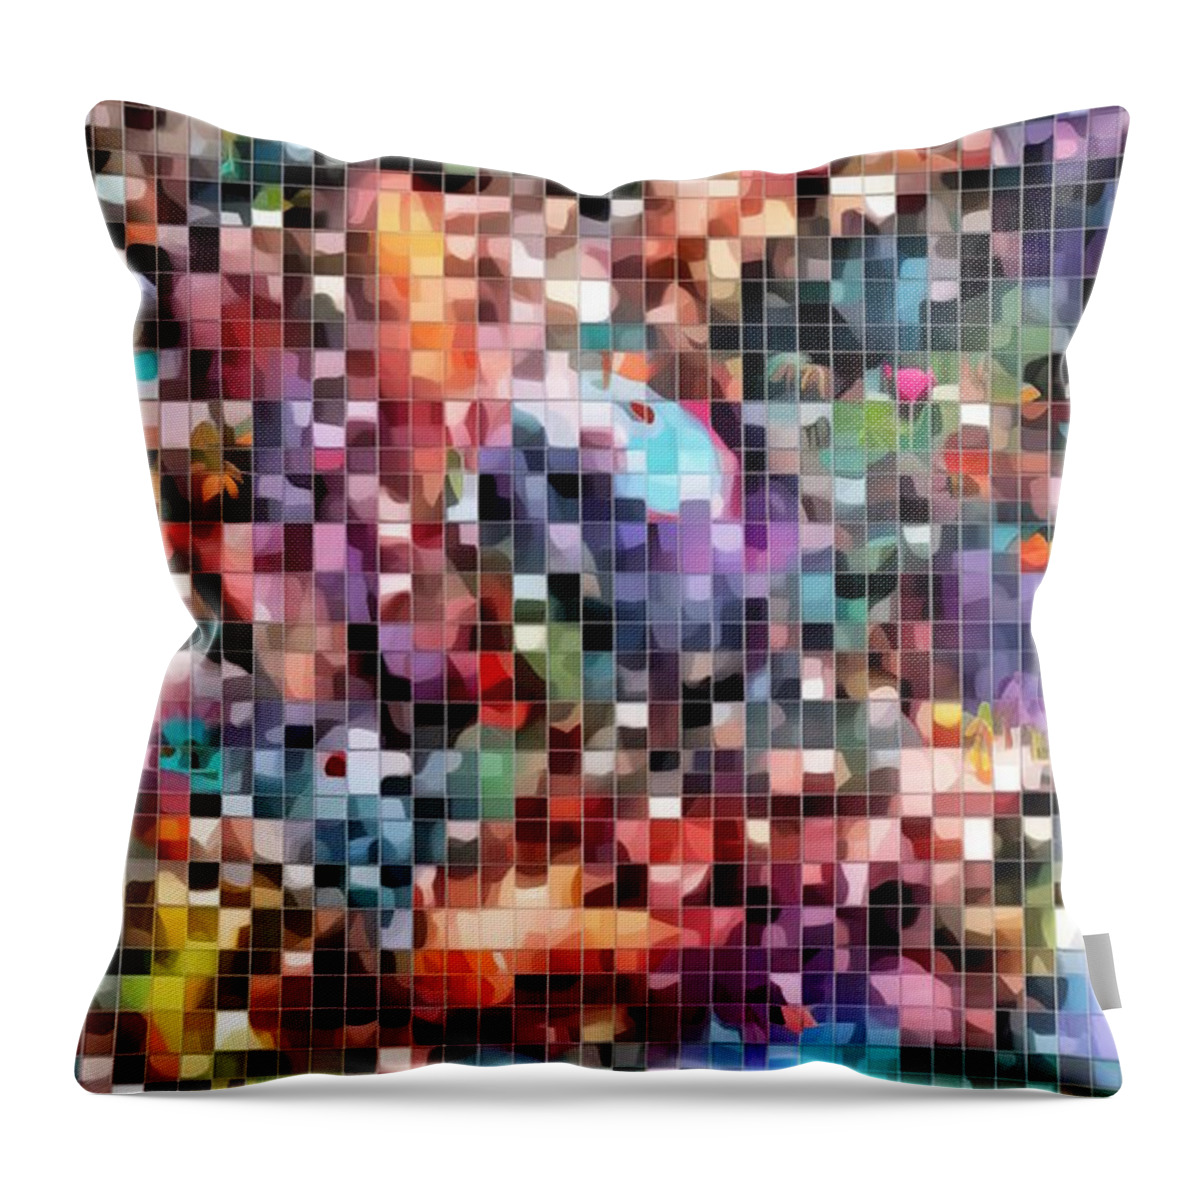  Throw Pillow featuring the digital art Case No 21 by Mark Slauter